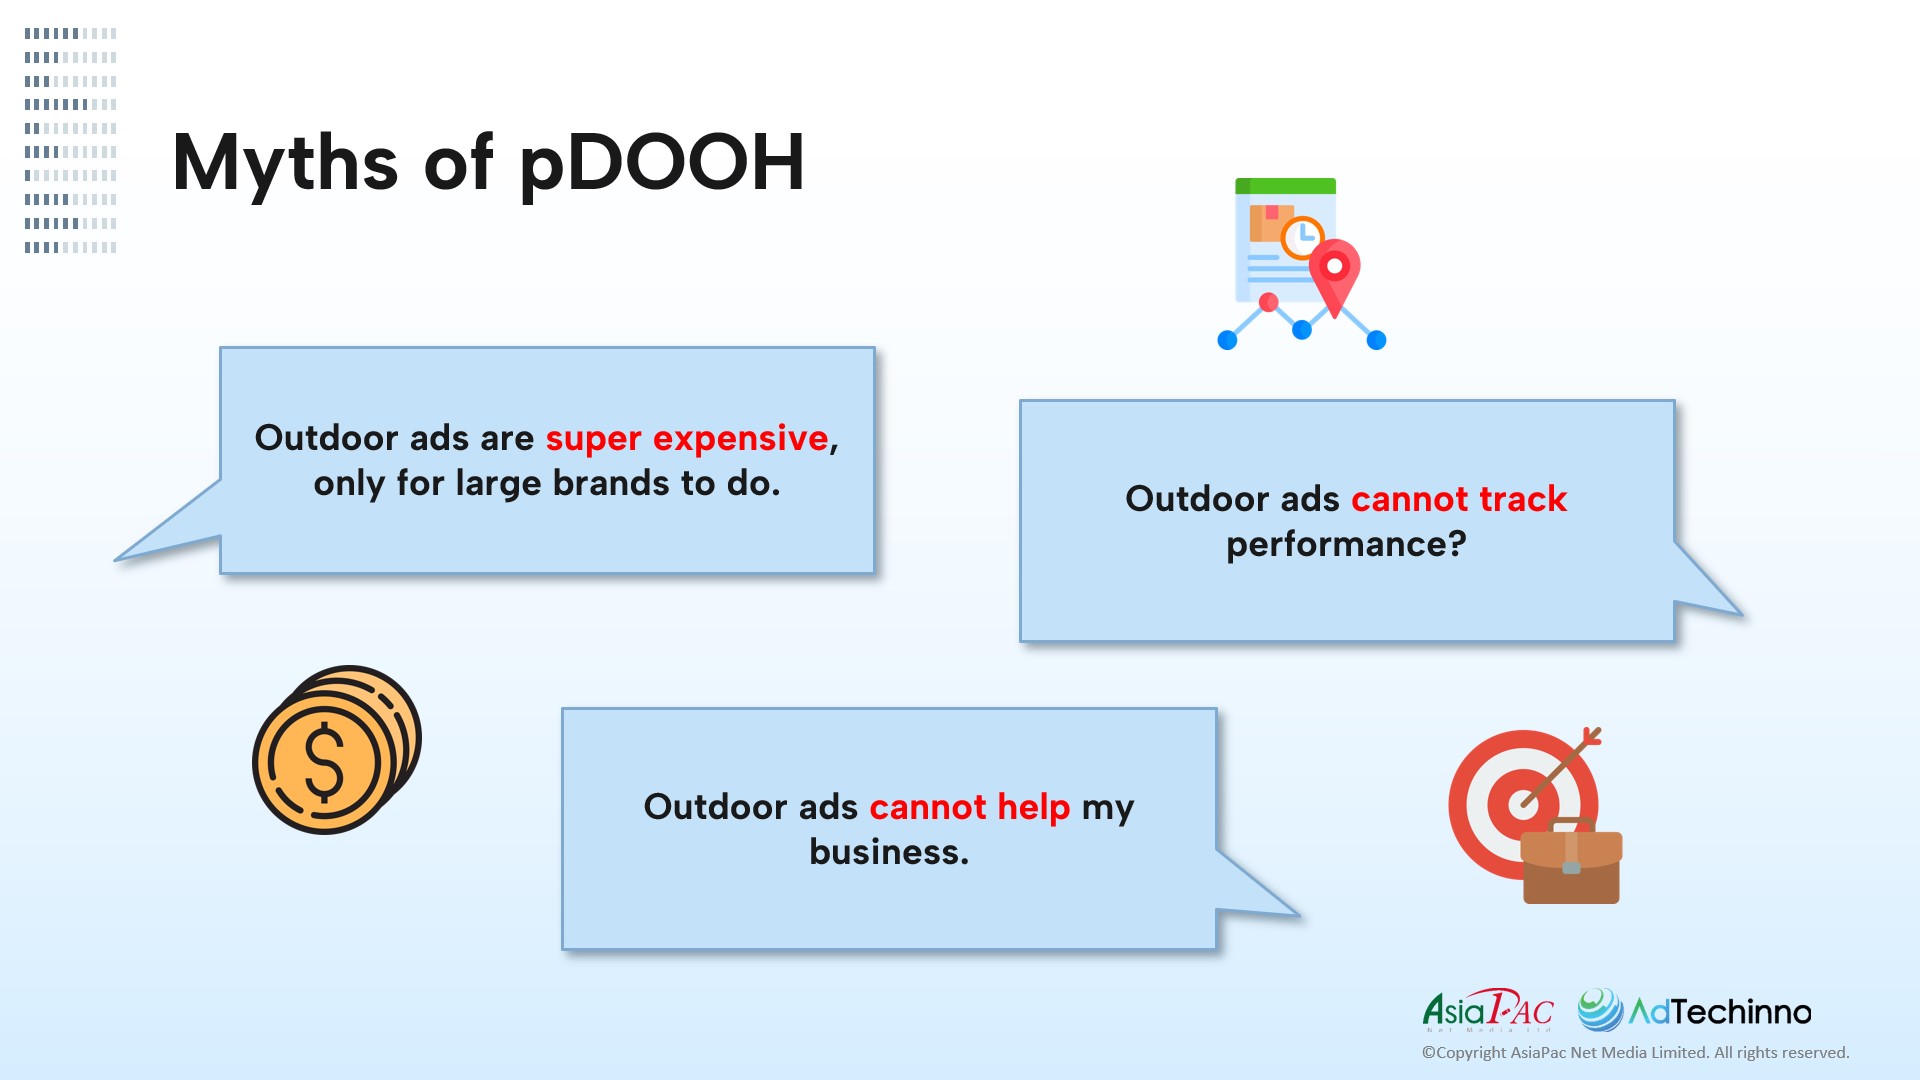 asiapac-drive-success-with-pdooh-advertising-the-future-of-digital-marketing-myths-and-misconceptions-of-pdooh-advertising.jpg